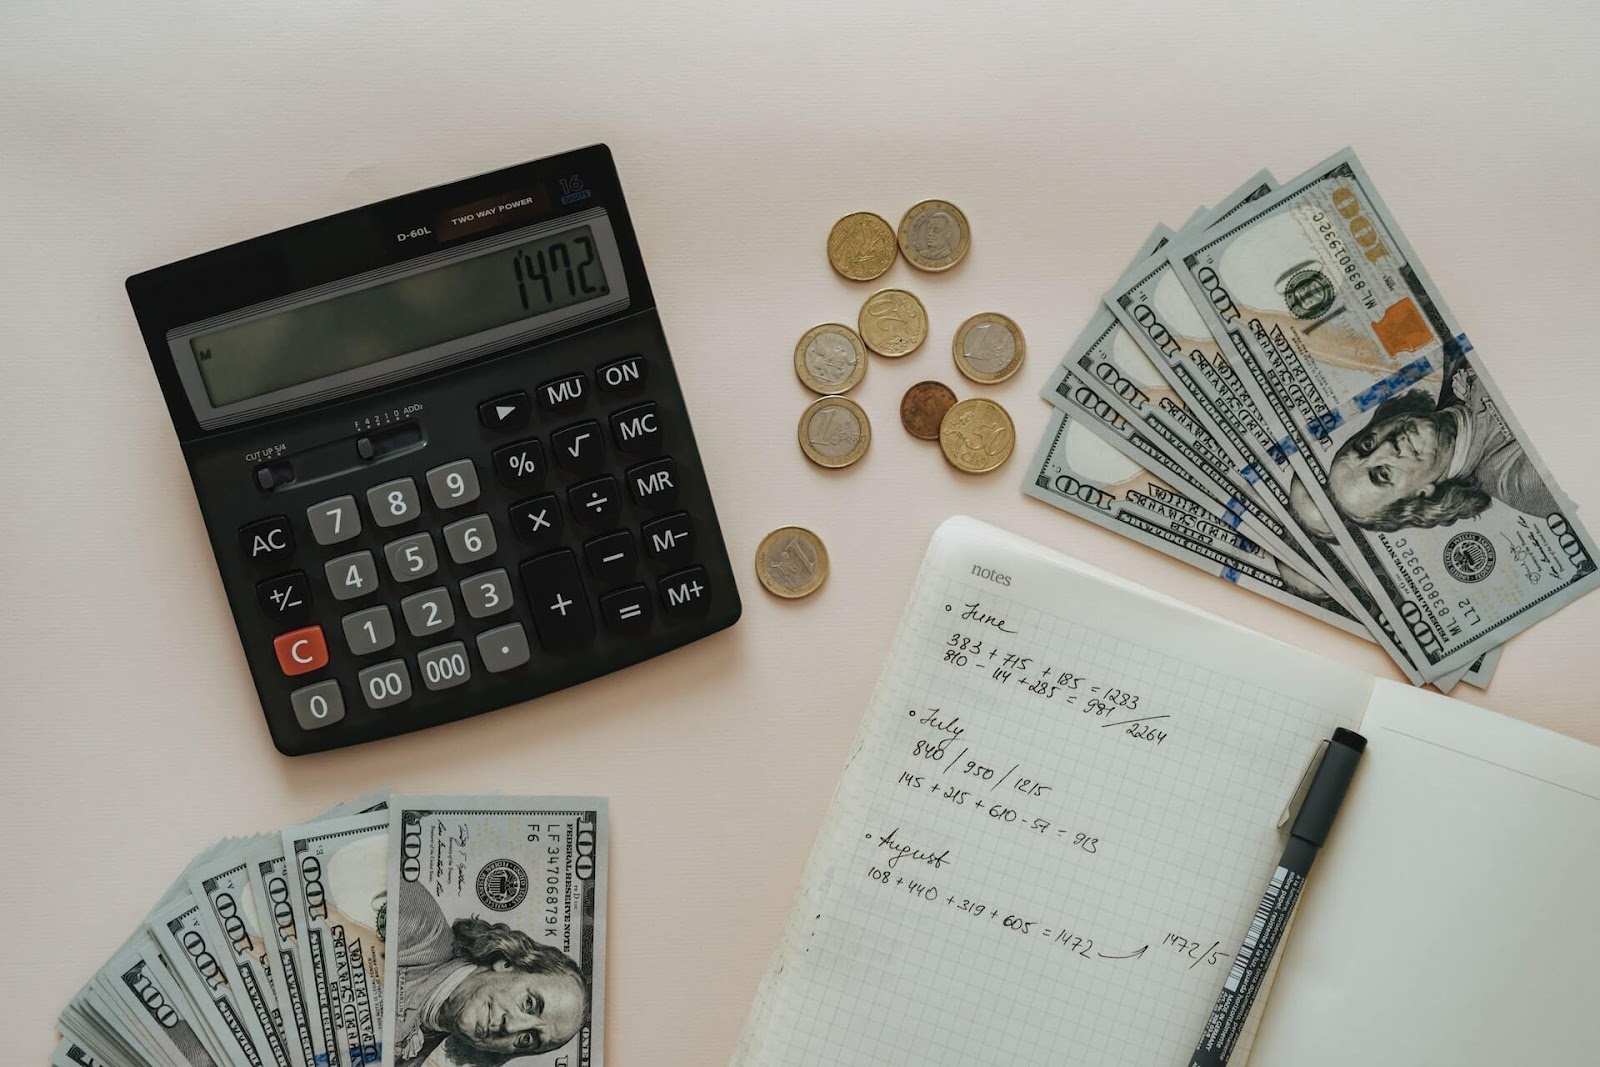 Cash and a calculator laid out by a ledger